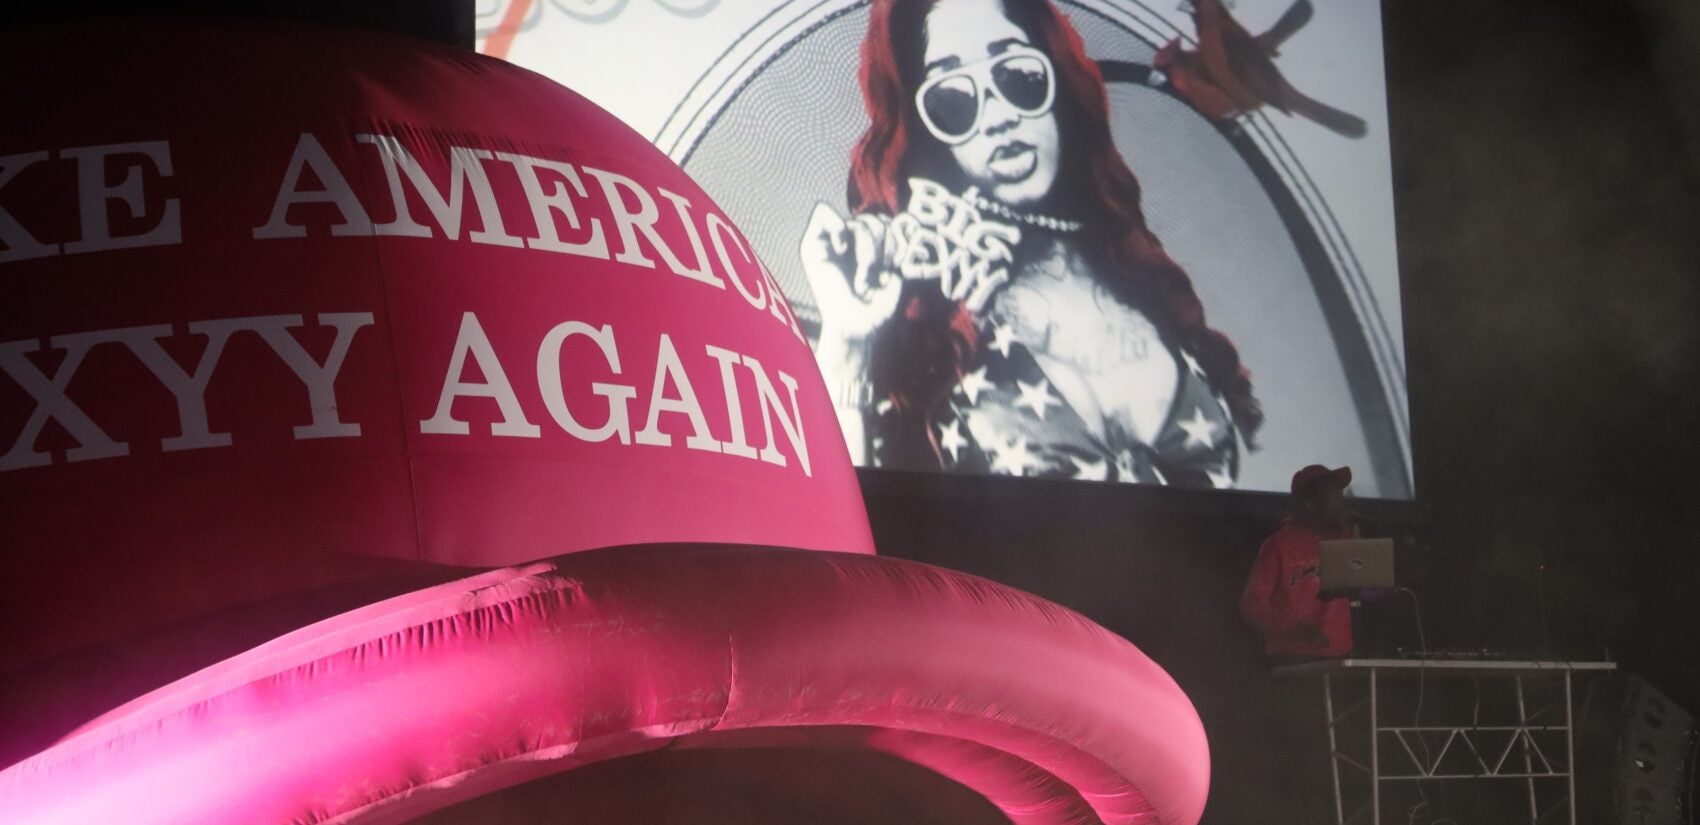 Sexyy Red's stage includes an inflatable hat reading Make America Sexyy Again